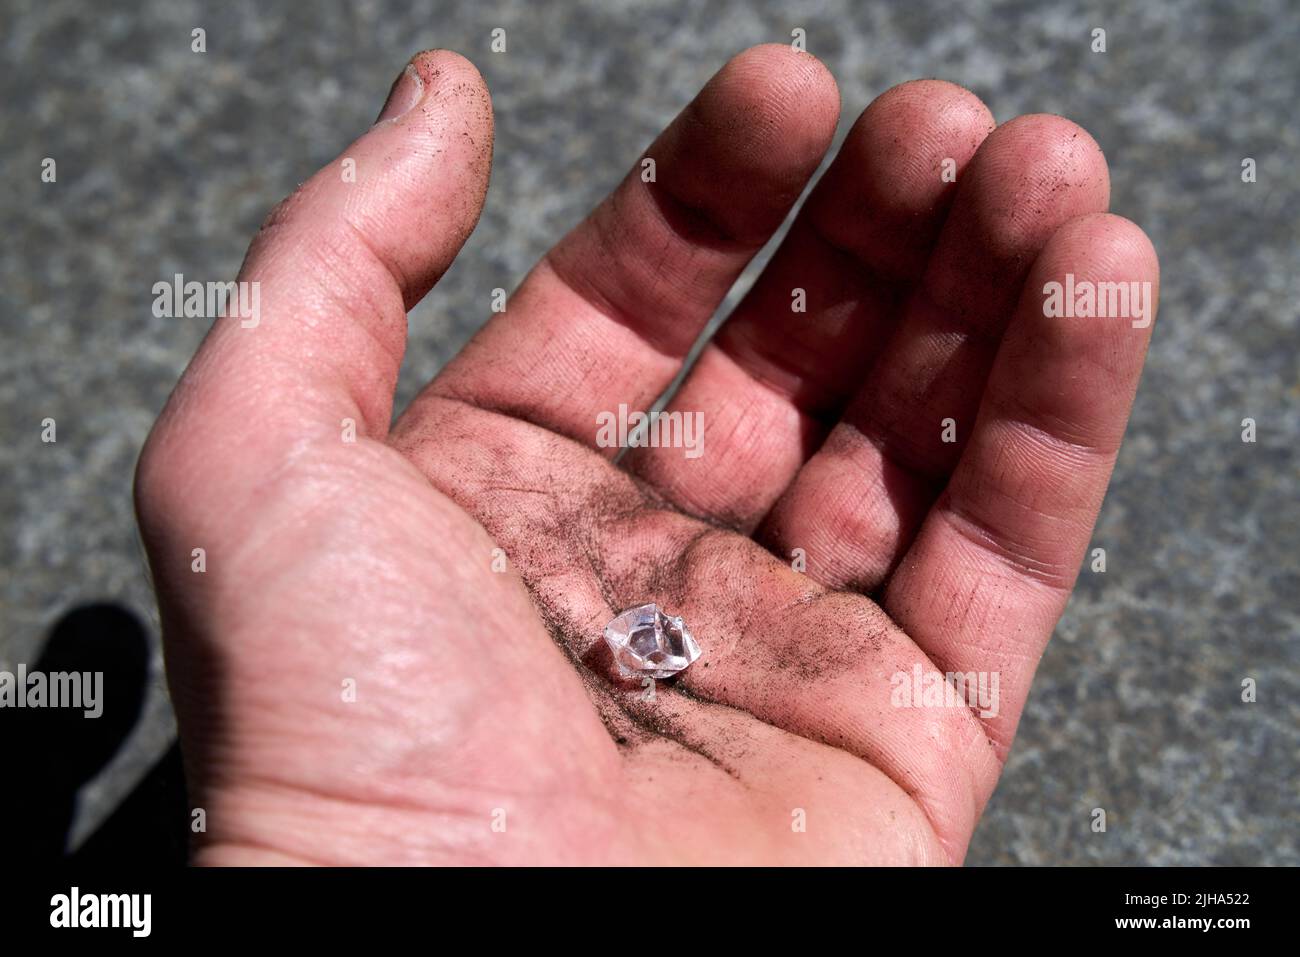 Hand with a simulated diamond pretending to have been found on earth Stock Photo